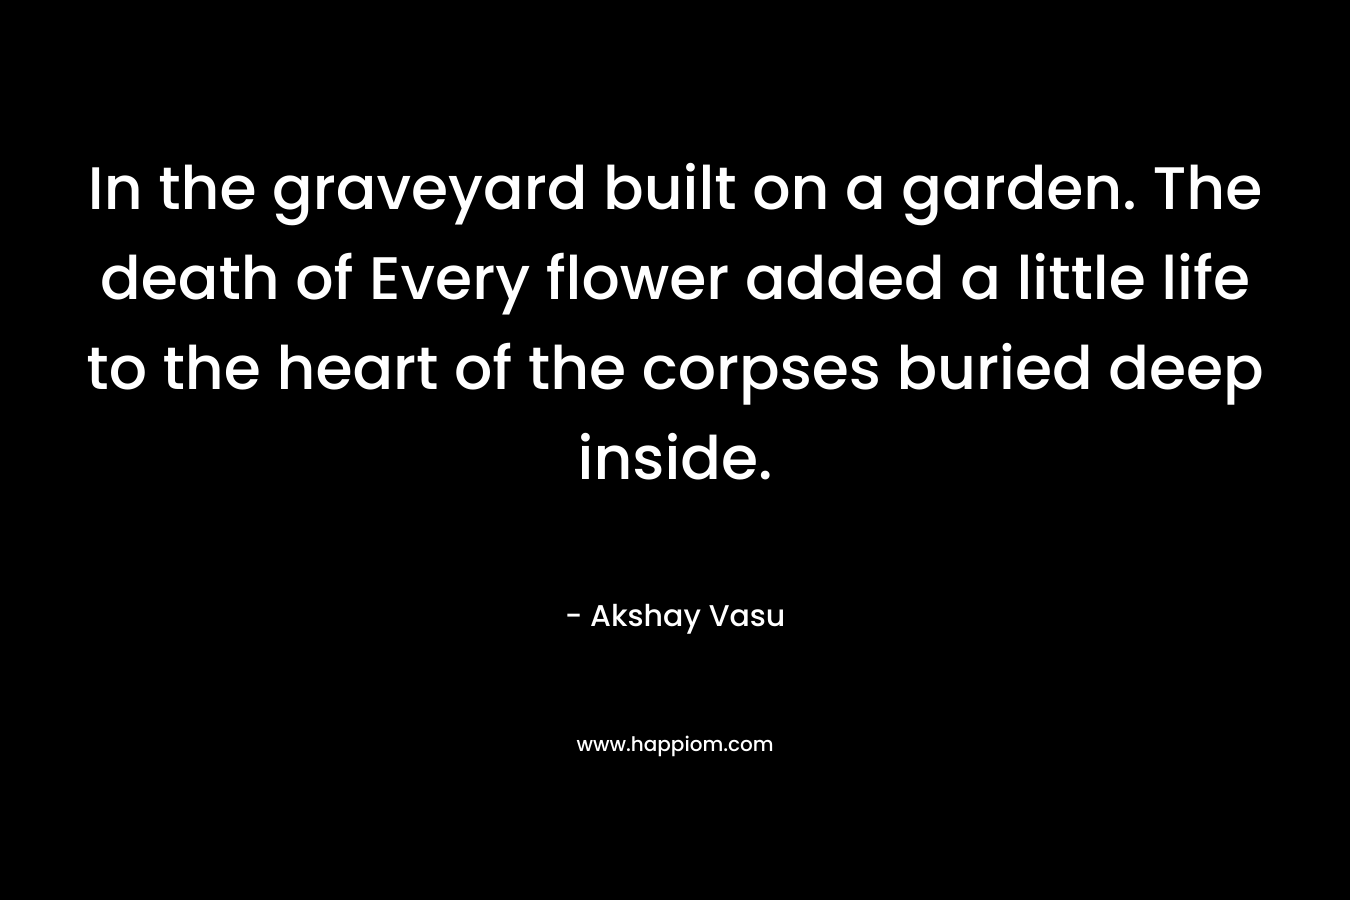 In the graveyard built on a garden. The death of Every flower added a little life to the heart of the corpses buried deep inside.